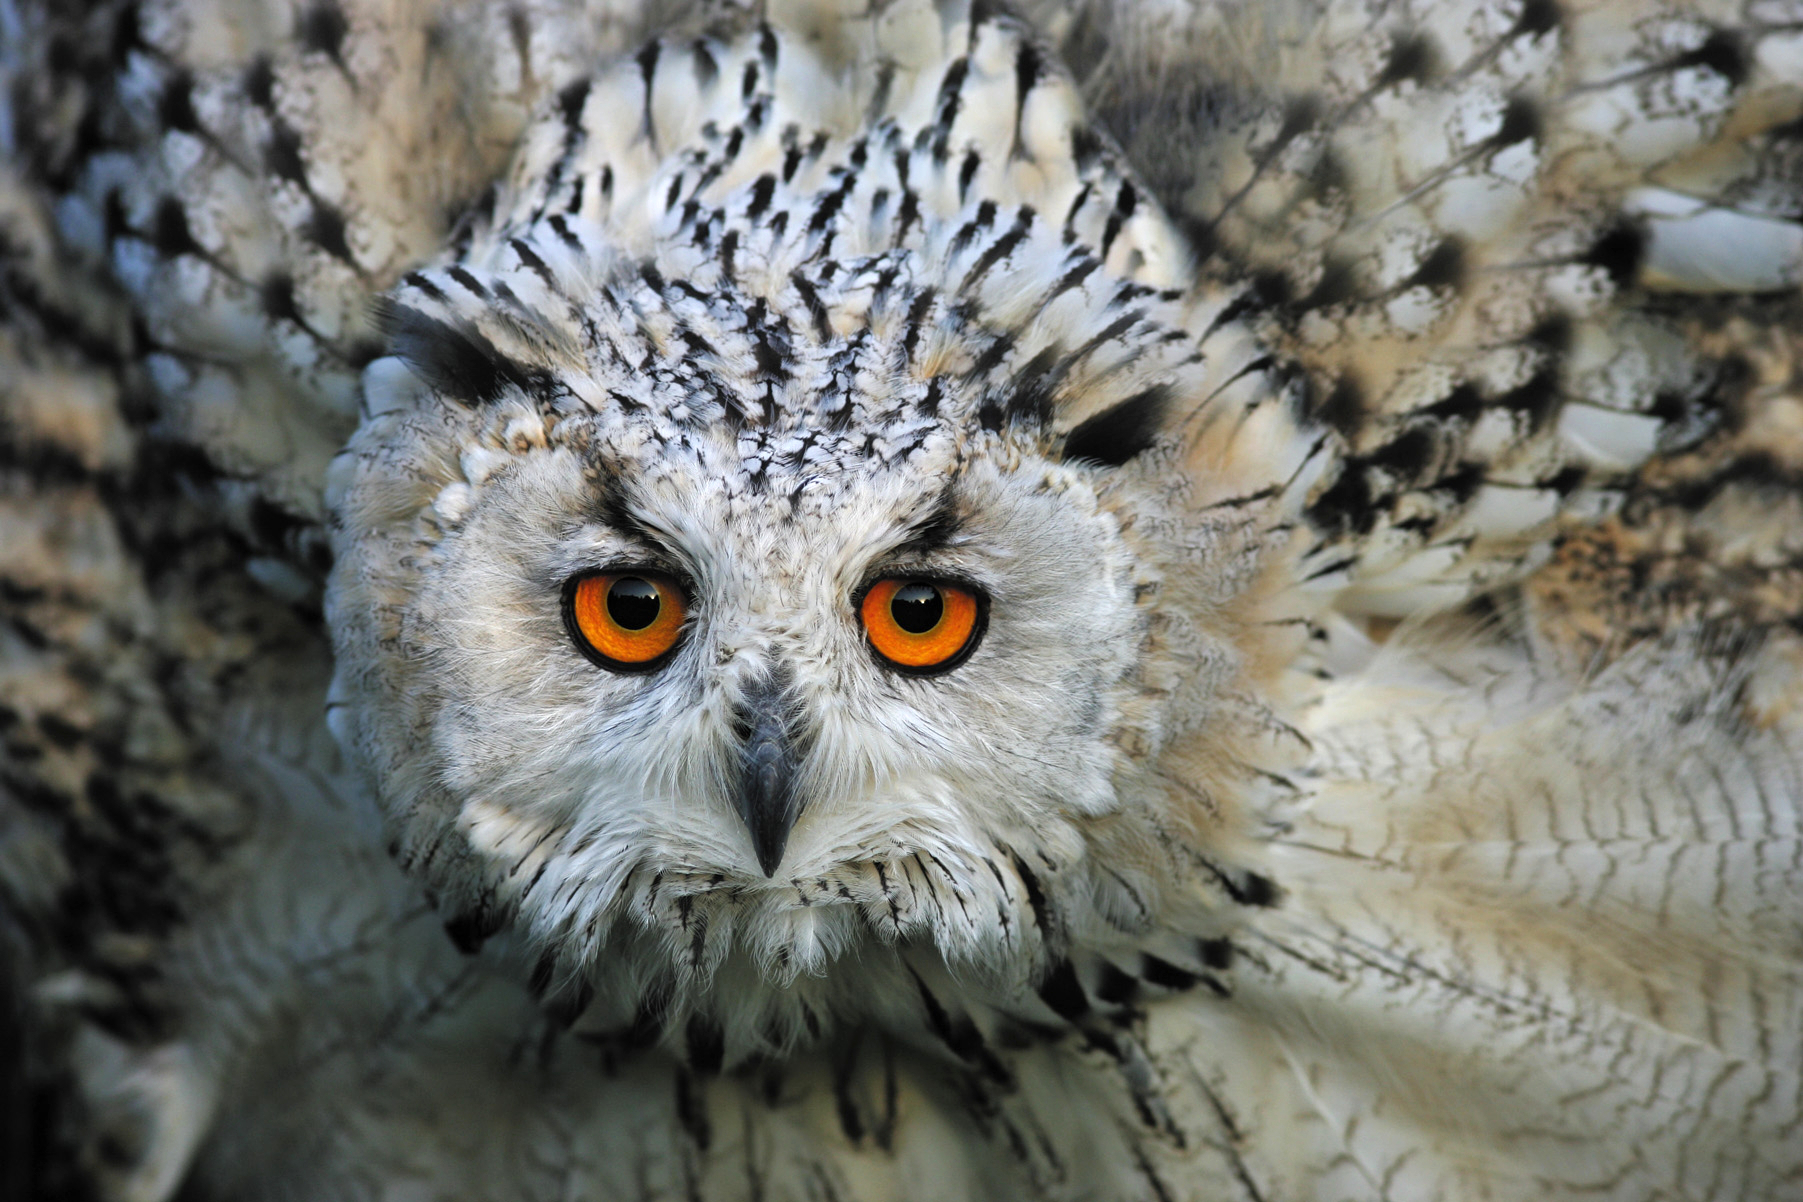 Reintroduction into the wild of an eagle owl, quarry Paderborn, Germany